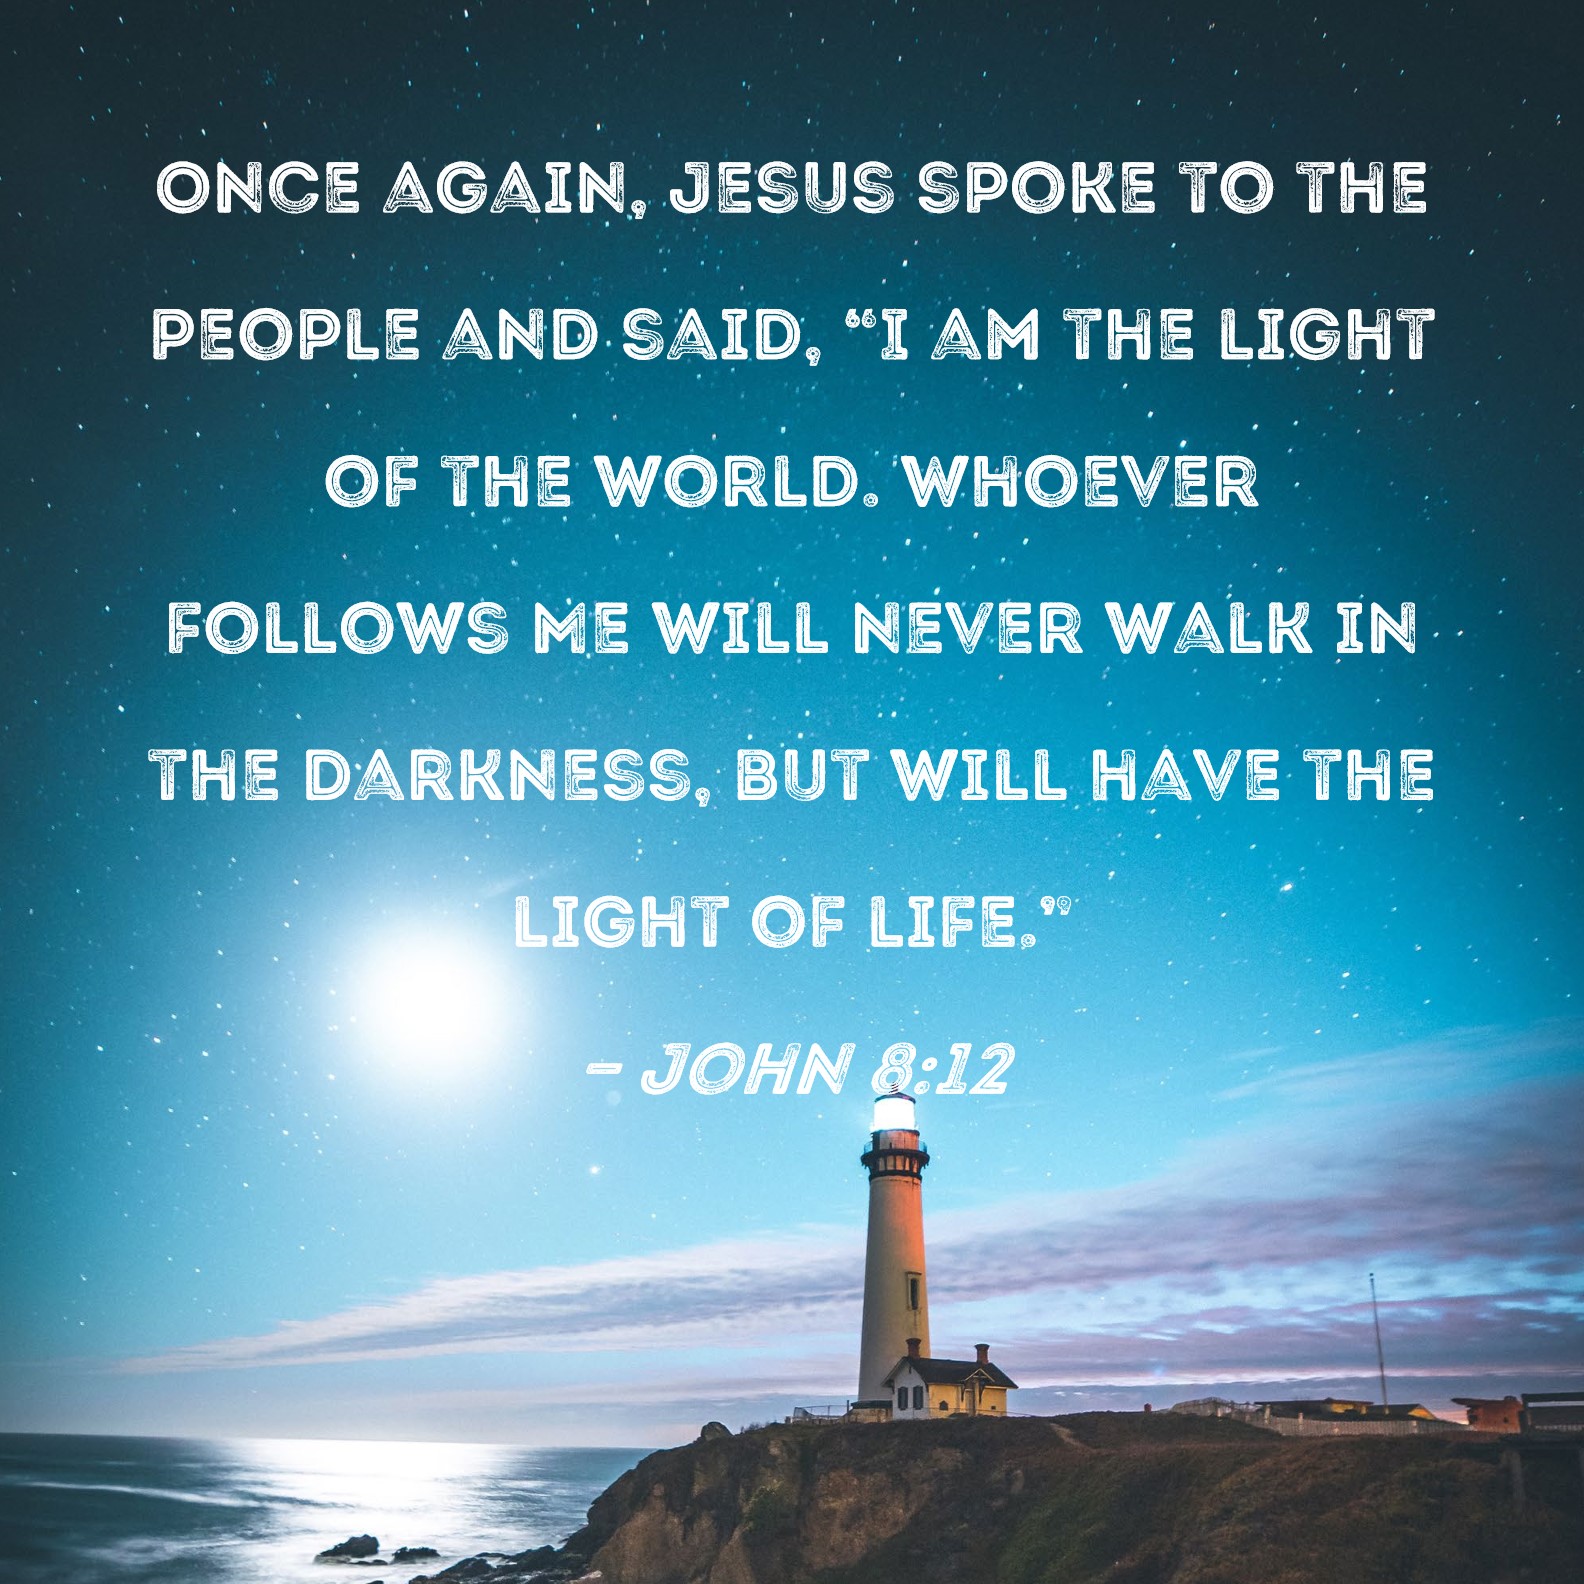 John 8:12 Once again, Jesus spoke to the and said, "I am the light of the world. Whoever Me will never walk in the darkness, but will have the light